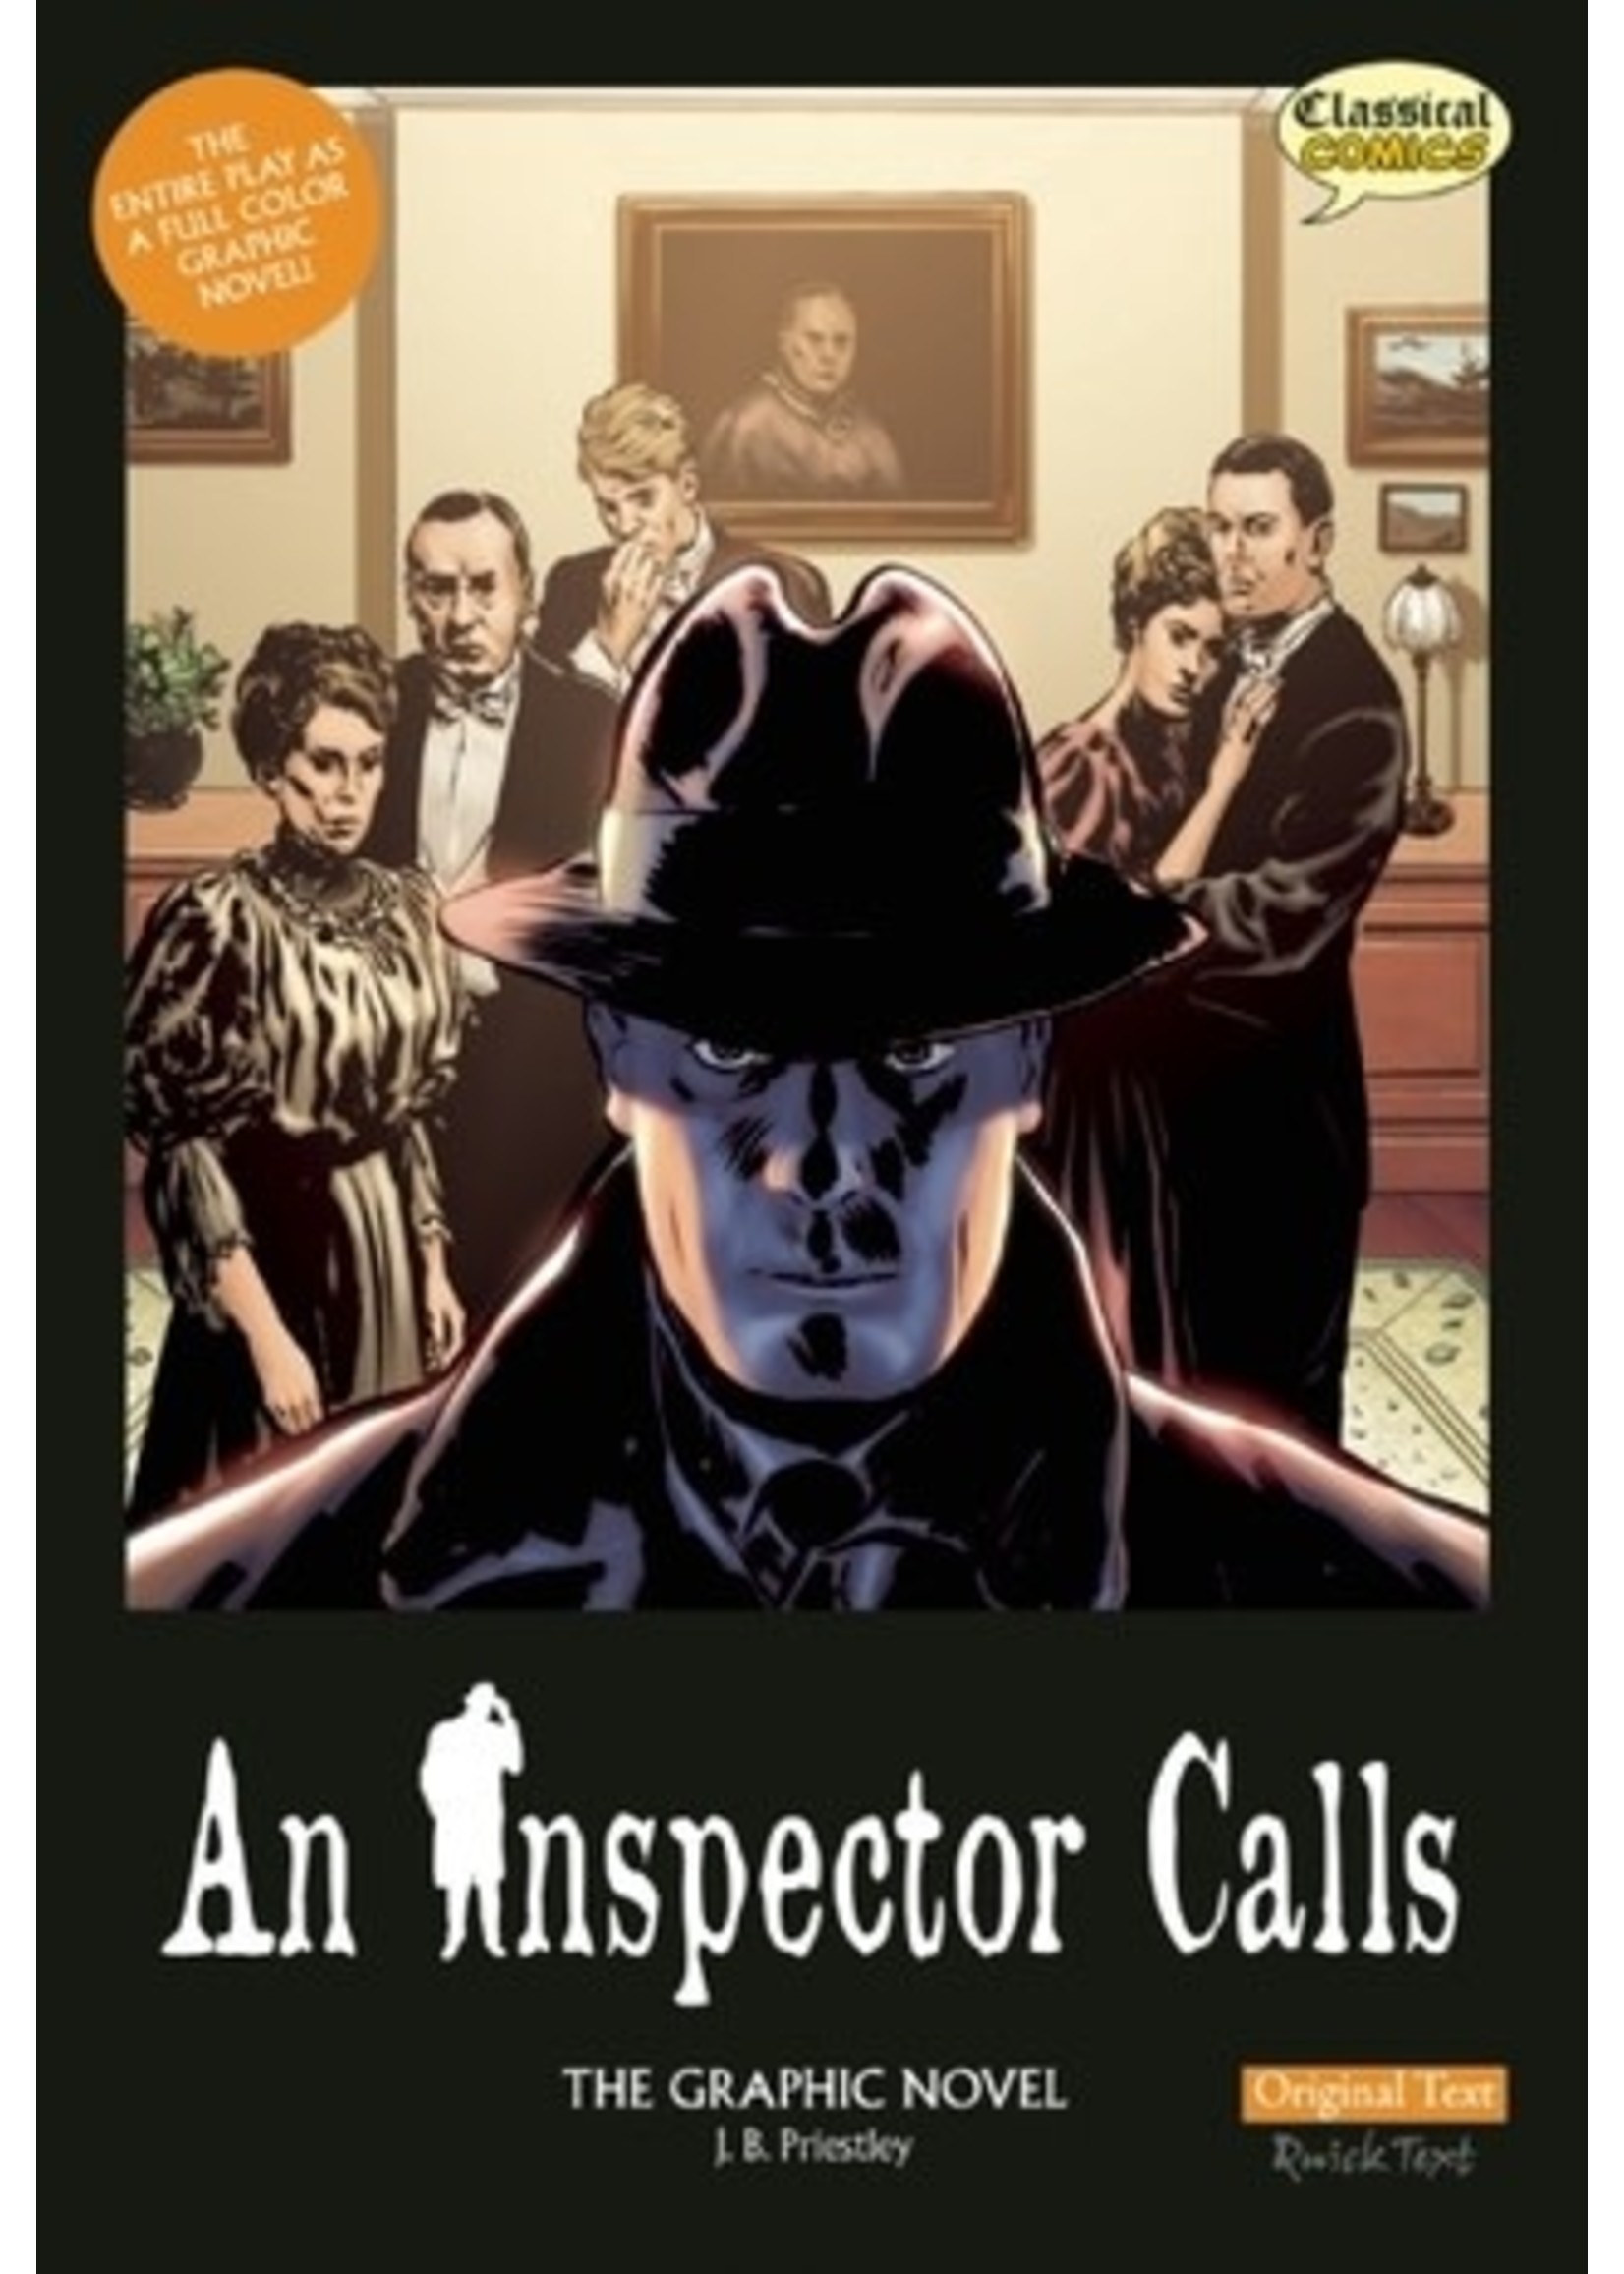 An Inspector Calls The Graphic Novel: Original Text by Jason Cobley,  Will Volley,  Alejandro Sanchez,  Jim Campbell,  Clive Bryant